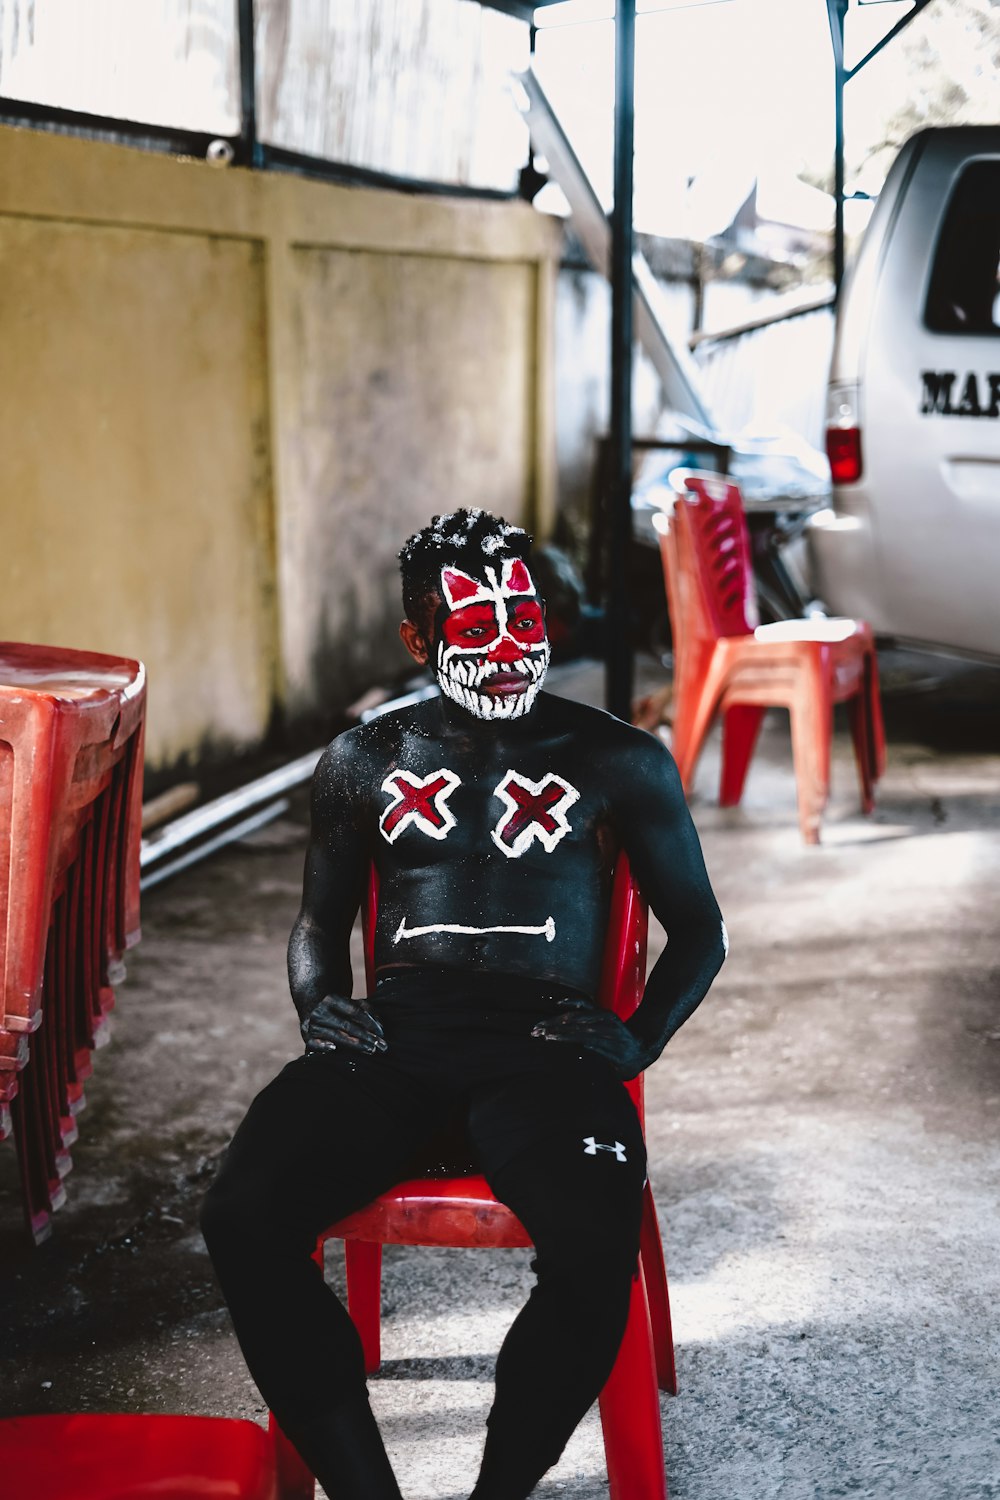 man in black and white mask sitting on red plastic chair